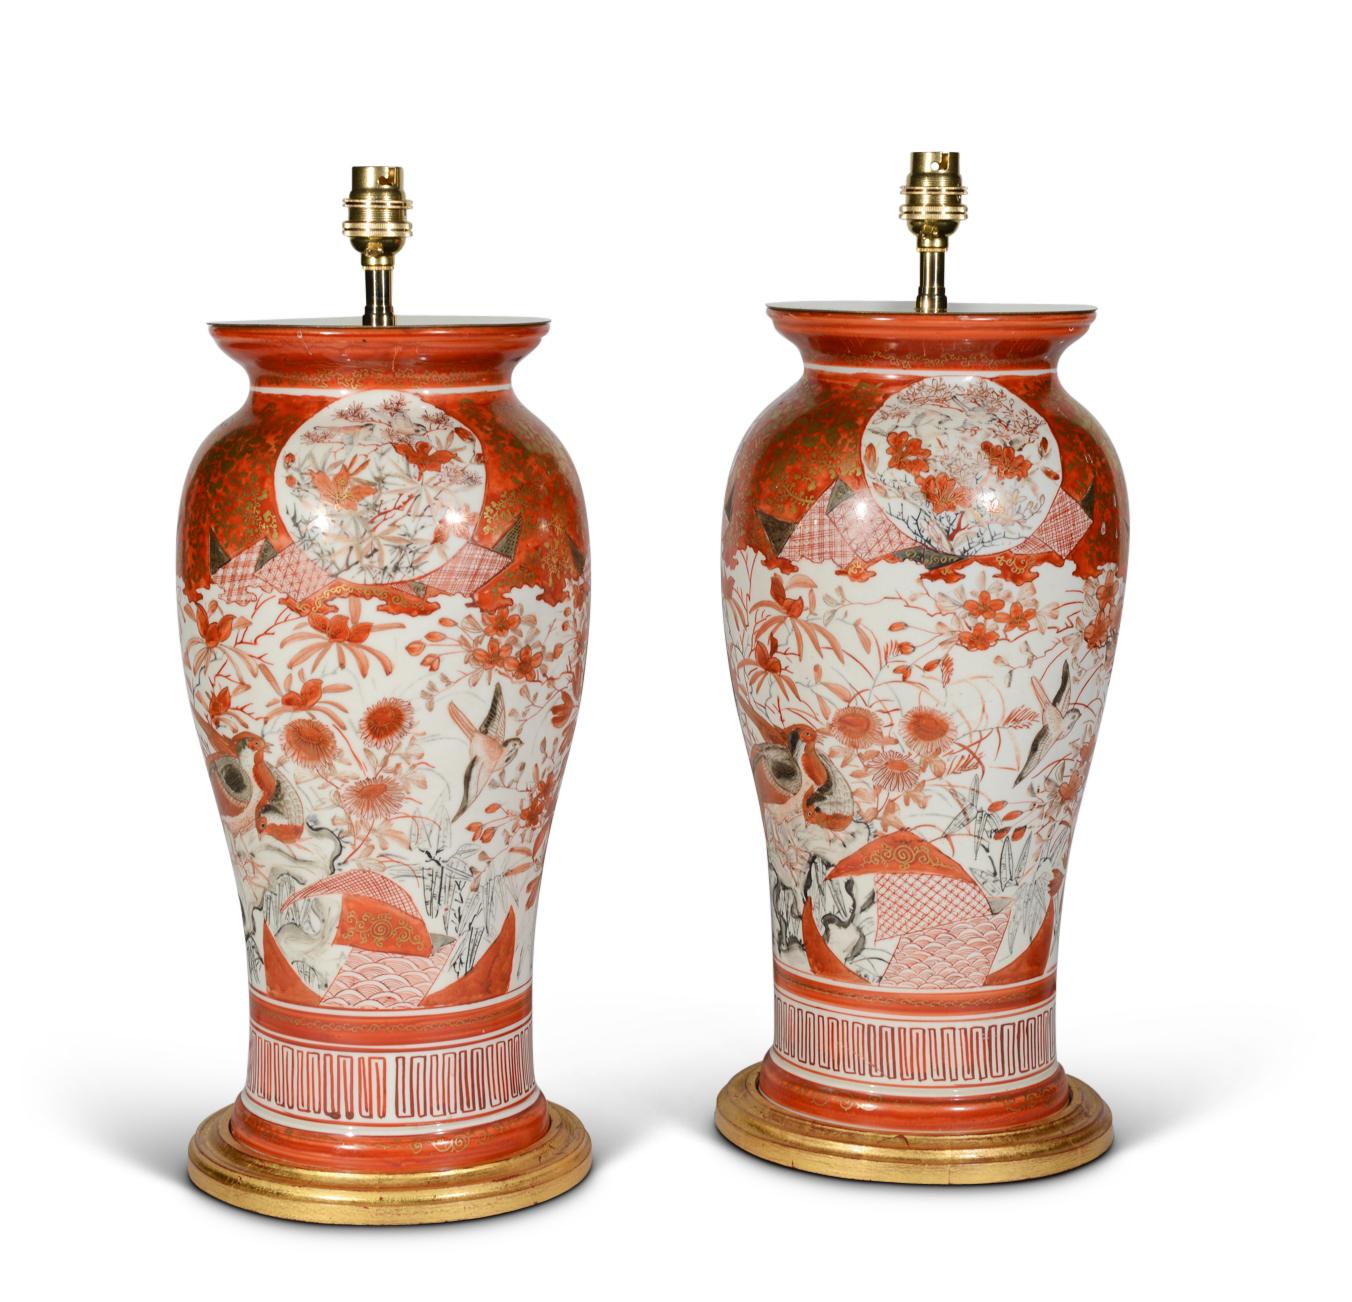 A fine pair of late 19th century Japanese Kutani vases, of baluster form, beautifully painted in the typical palette of oranges on a white background with gilded highlights, with pheasants and other exotic birds armongst stylised foliage, flowers